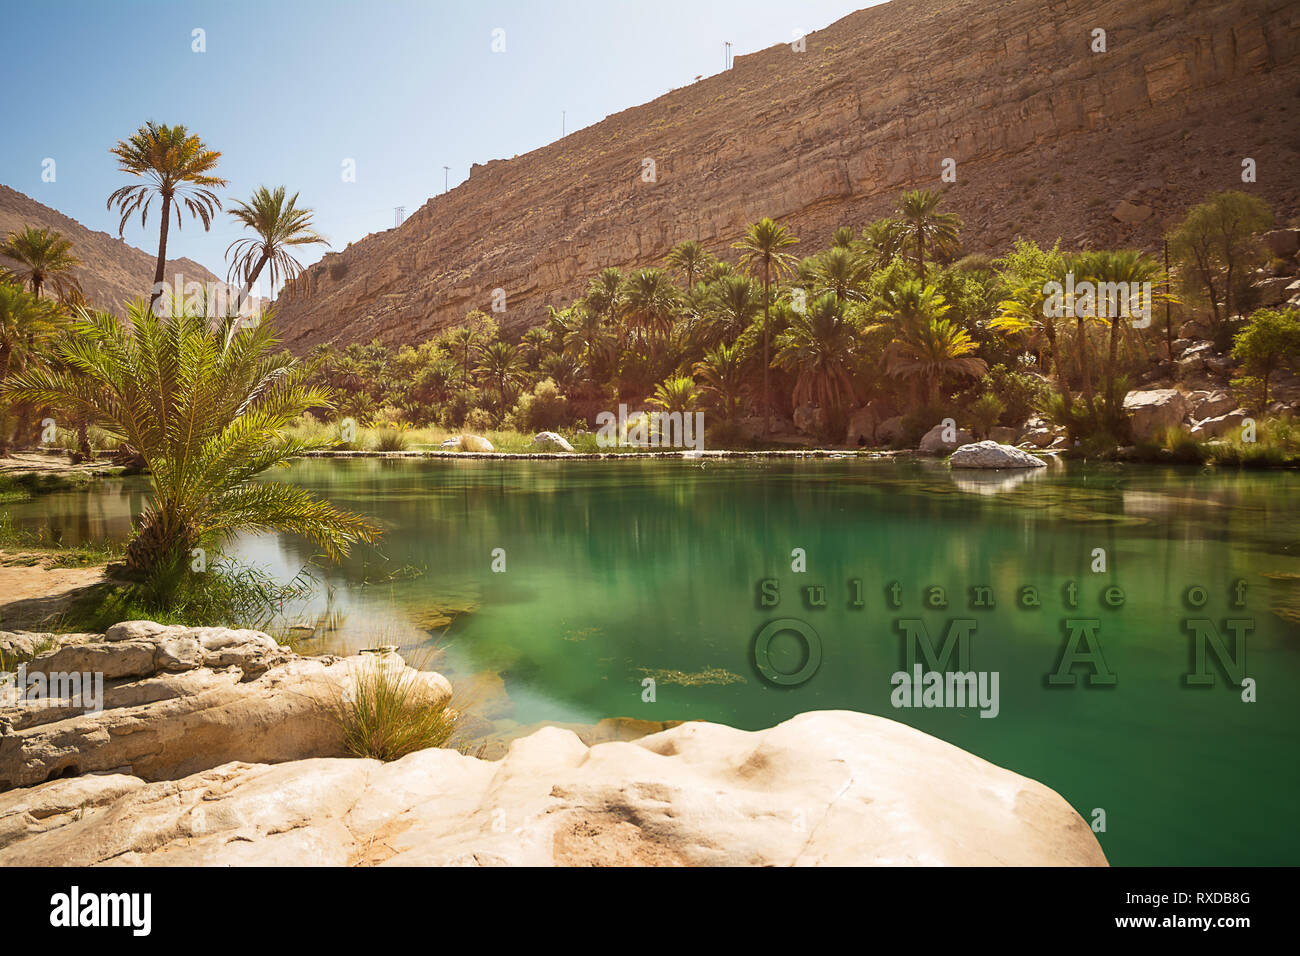 Wonderful lake and oasis with palm trees (Wadi Bani Khalid) in the Omani desert and overwritten text Stock Photo